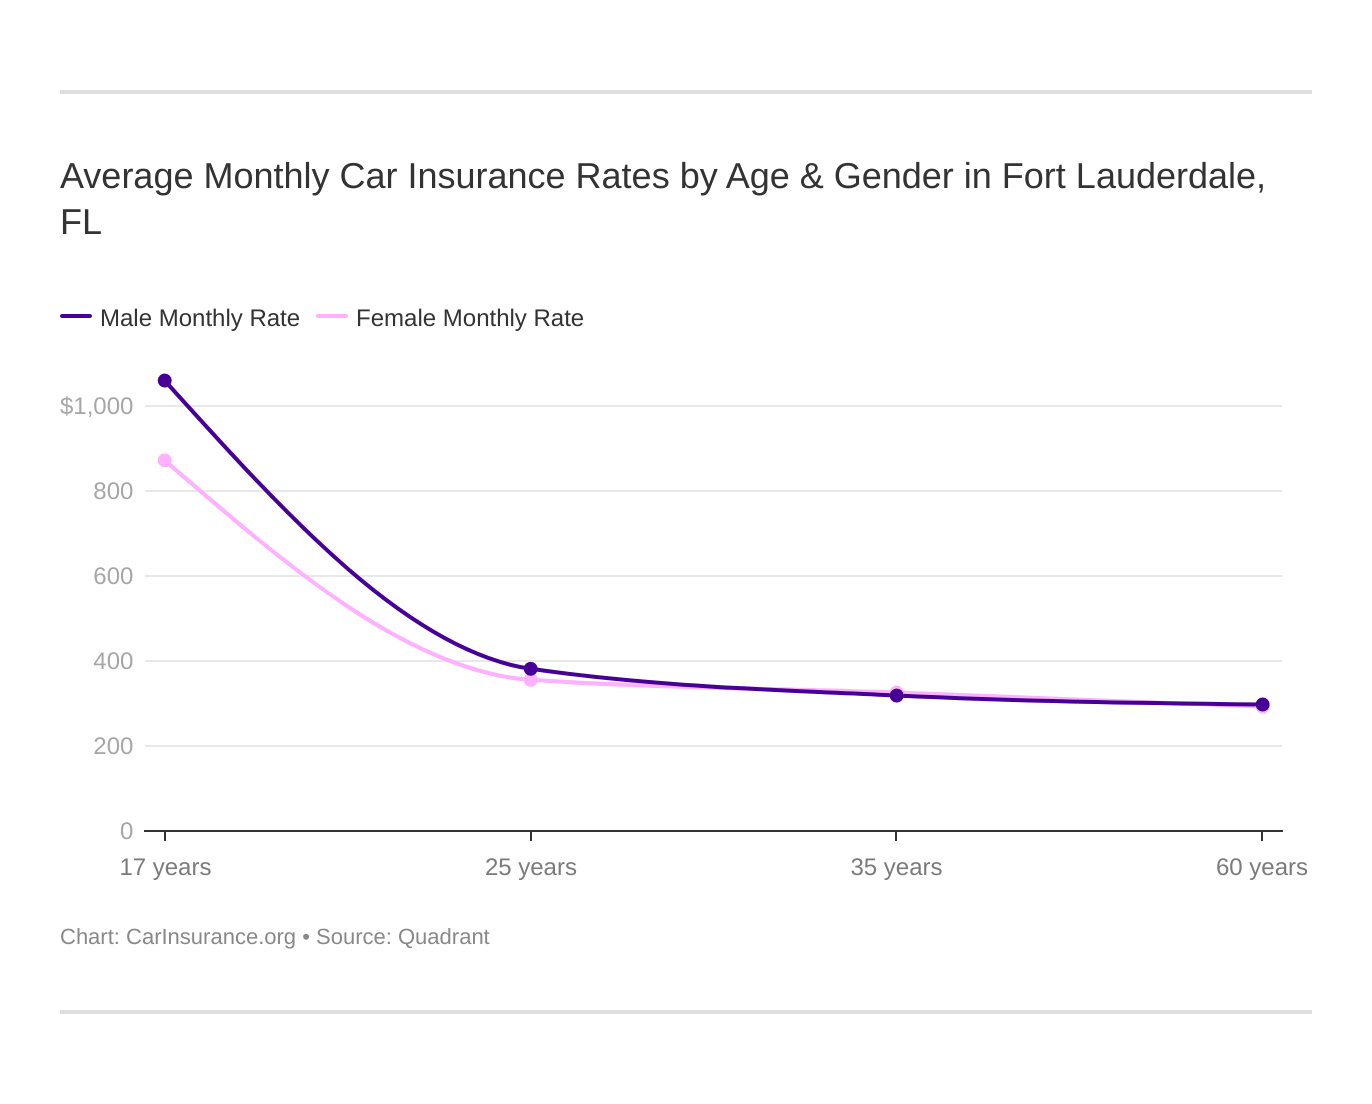 Average Monthly Car Insurance Rates by Age & Gender in Fort Lauderdale, FL